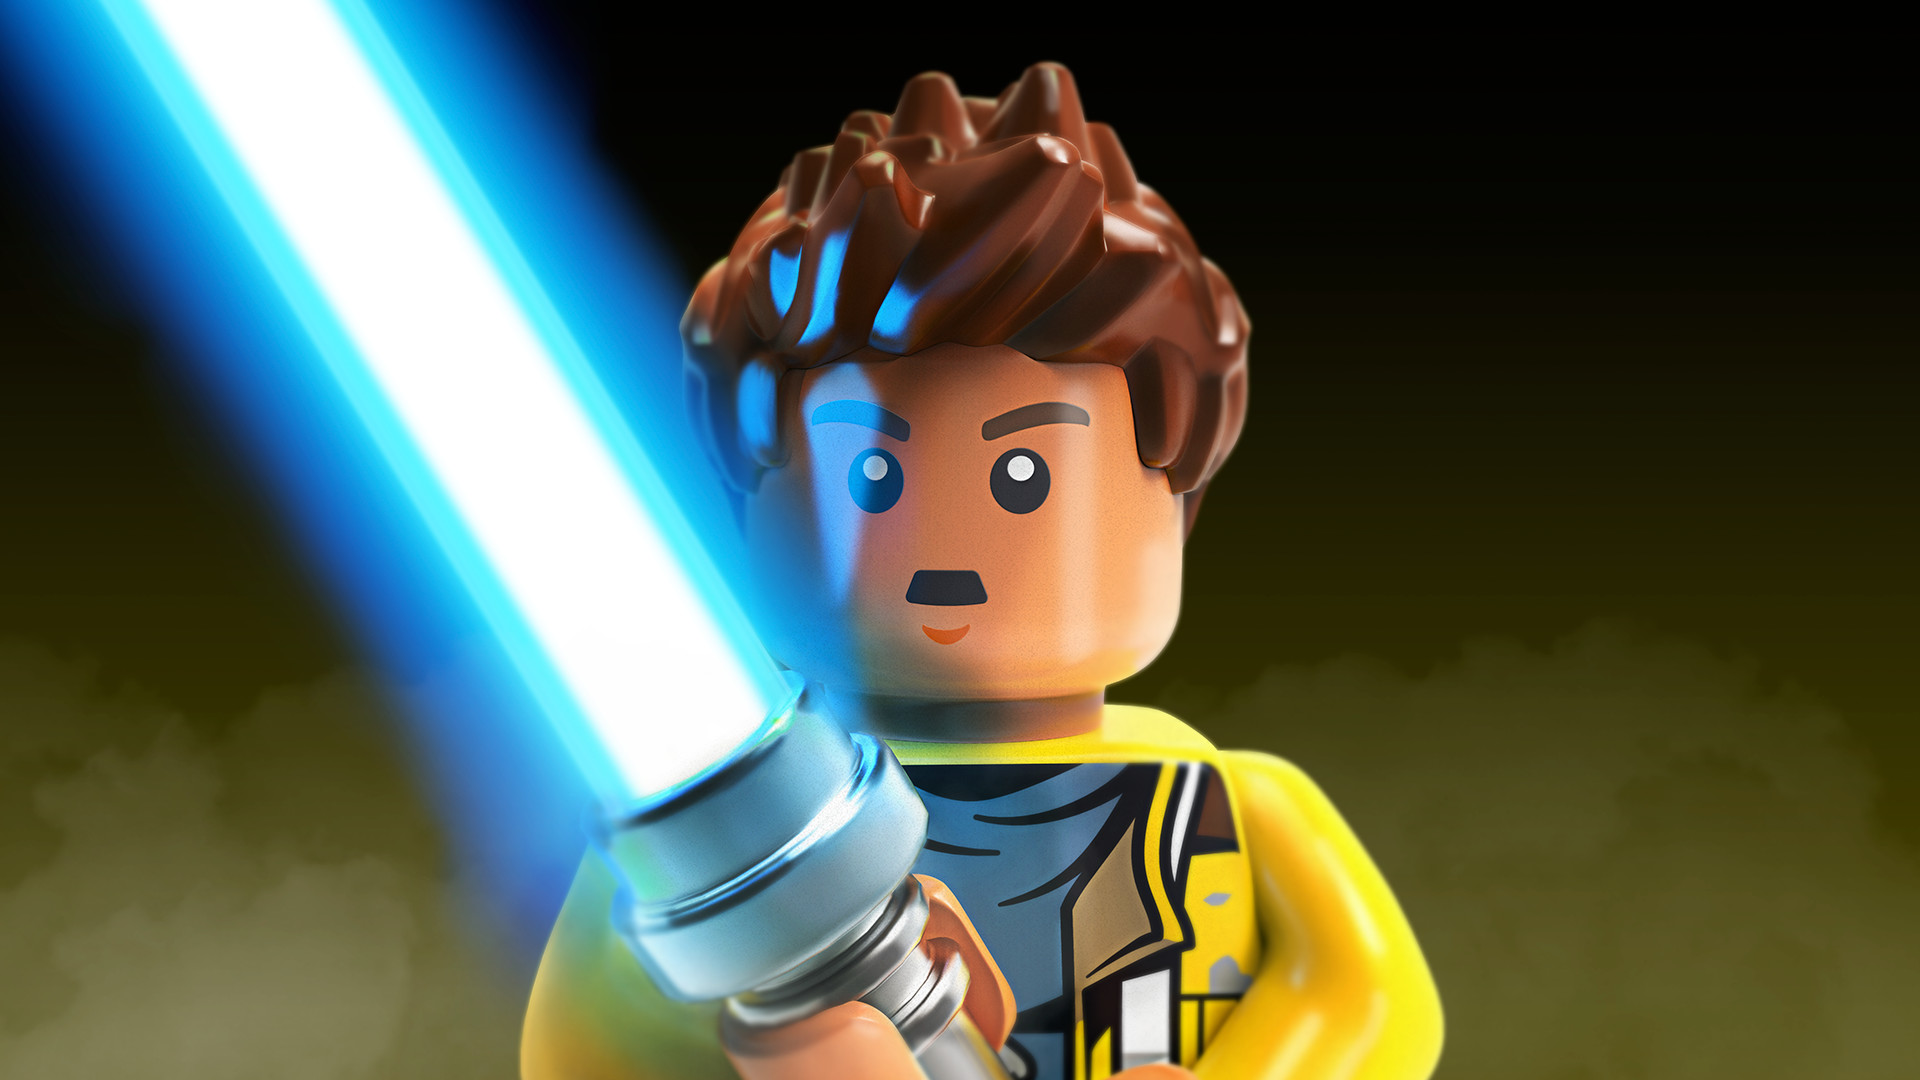 LEGO Star Wars: The Force Awakens - The Freemaker Adventures Character Pack DLC Steam CD Key 1.68 usd